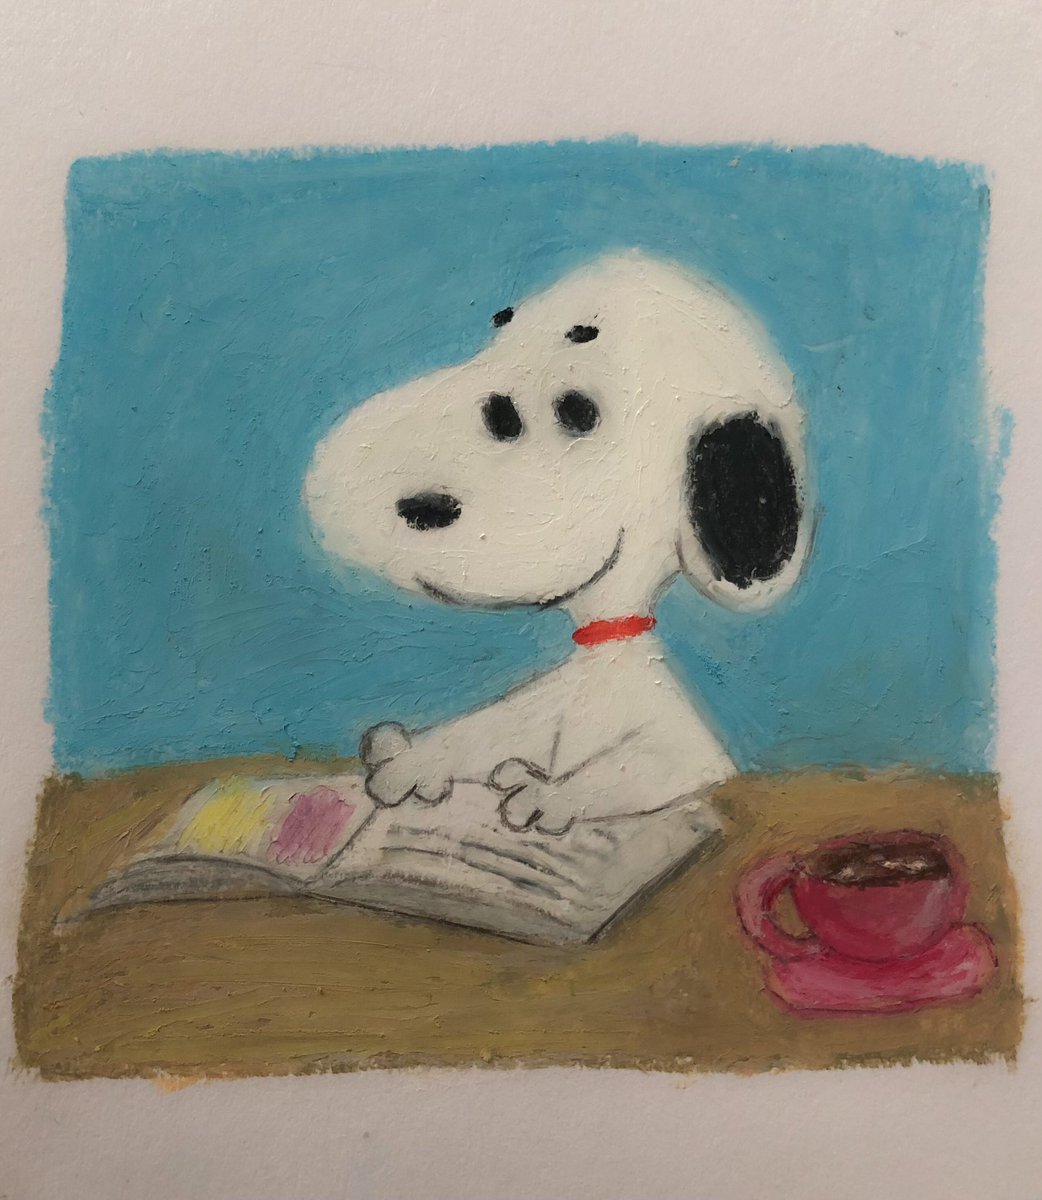 more snoopy in oil pastel ♥️